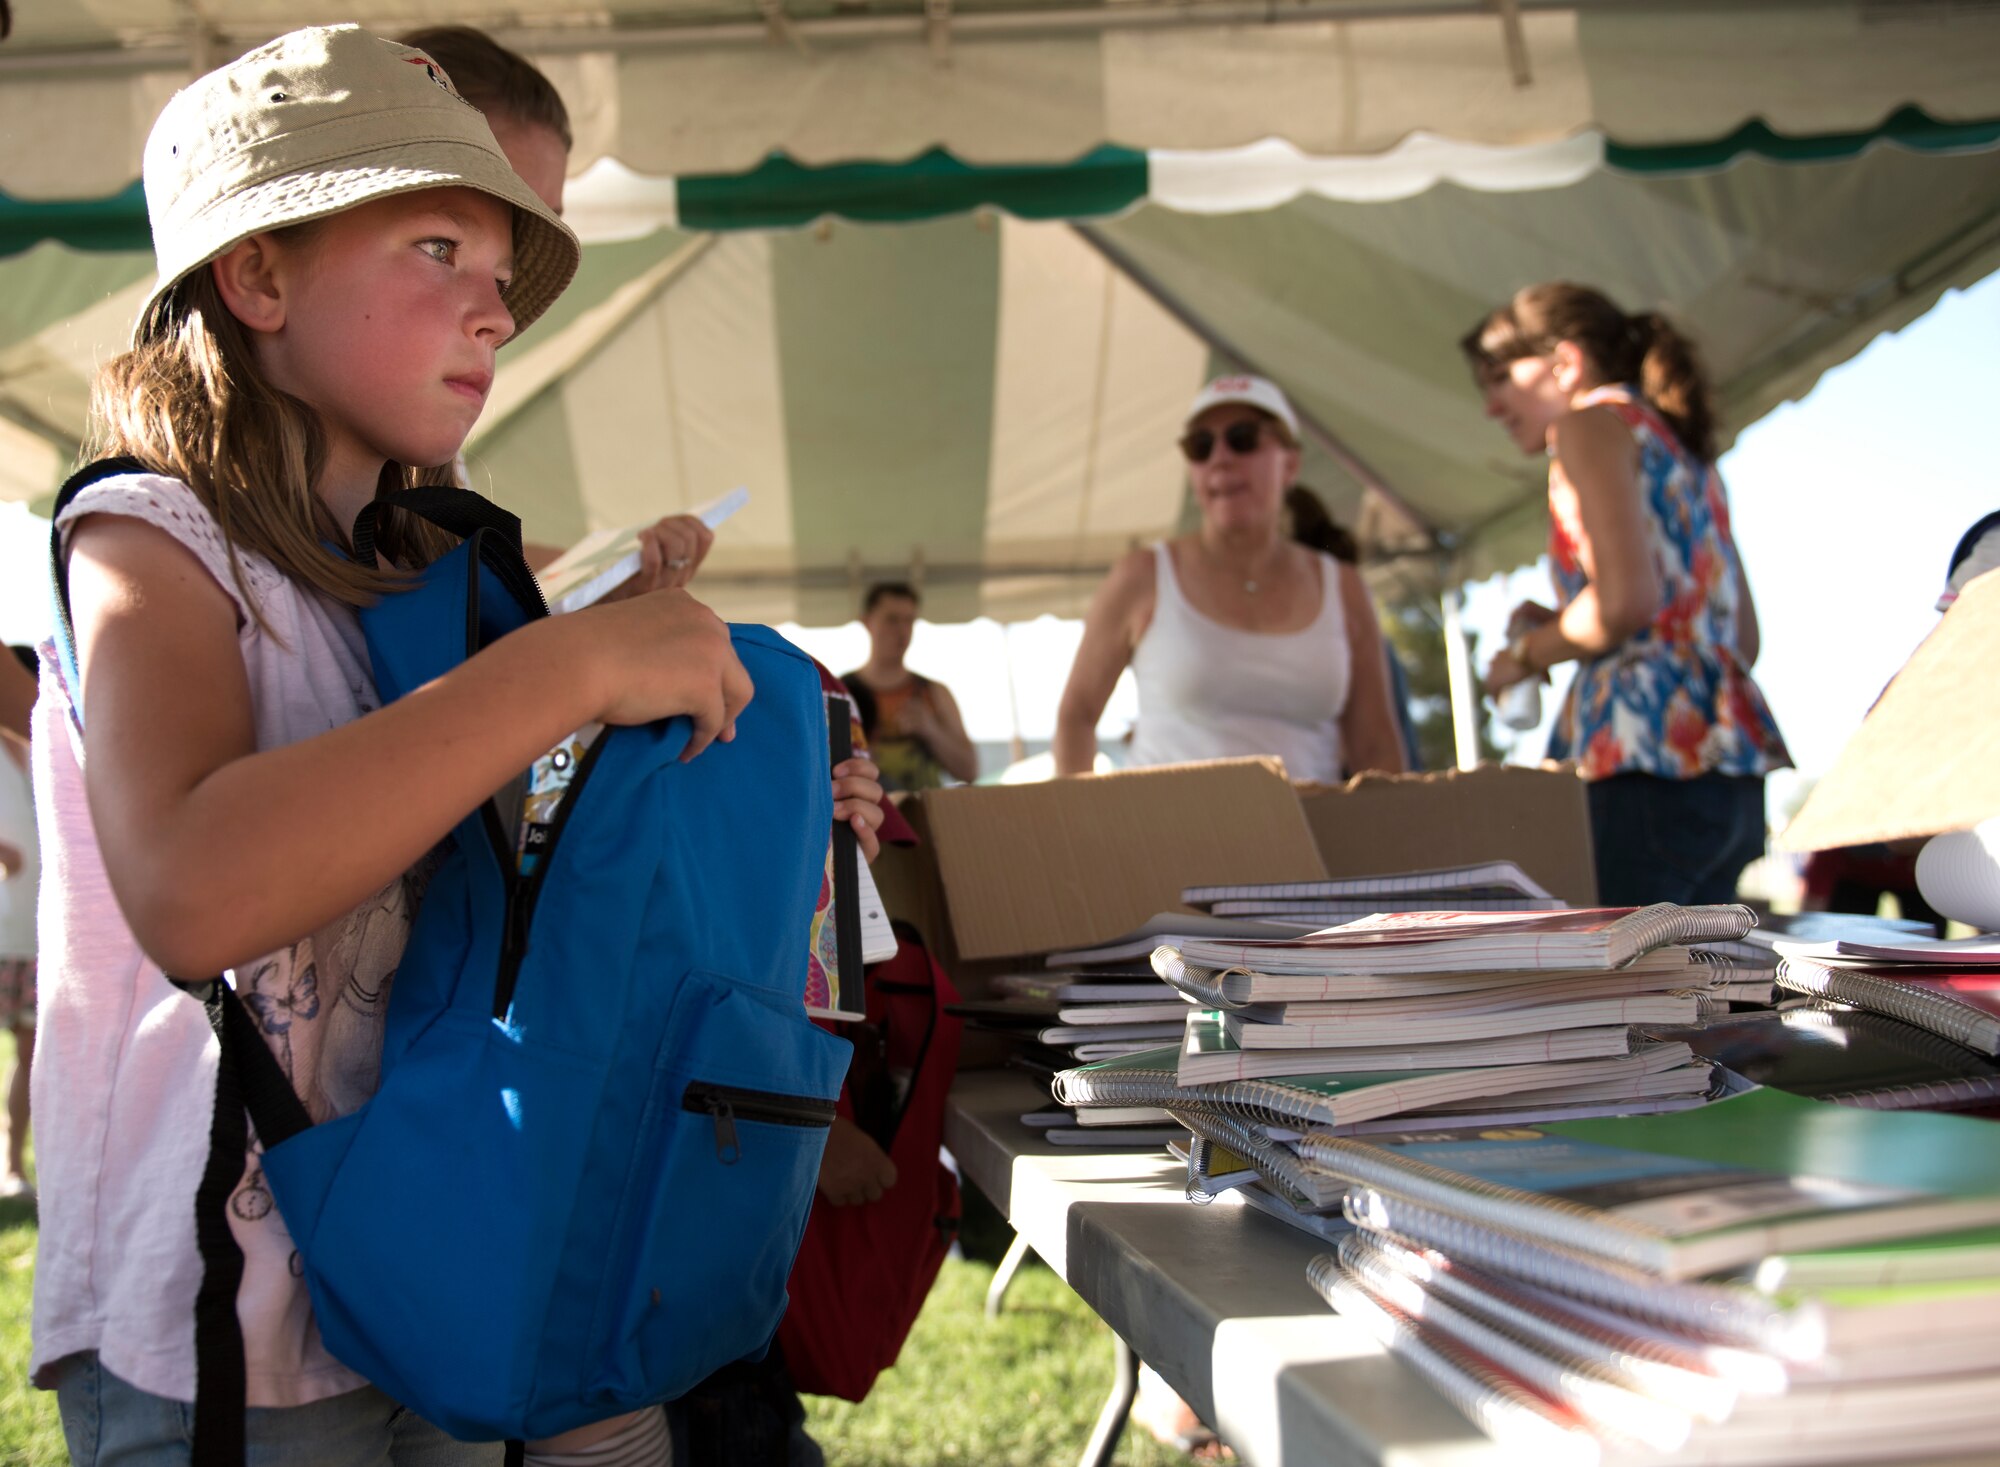 A child picks out school supplies during the Back-To-School Bash July 25, 2018, at Luke Air Force Base, Ariz. The event allowed on-base and local organizations to provide hundreds of backpacks, notebooks, folders, pencils, and other school supplies to military families preparing for the new school year. (U.S. Air Force photo by Senior Airman Ridge Shan)